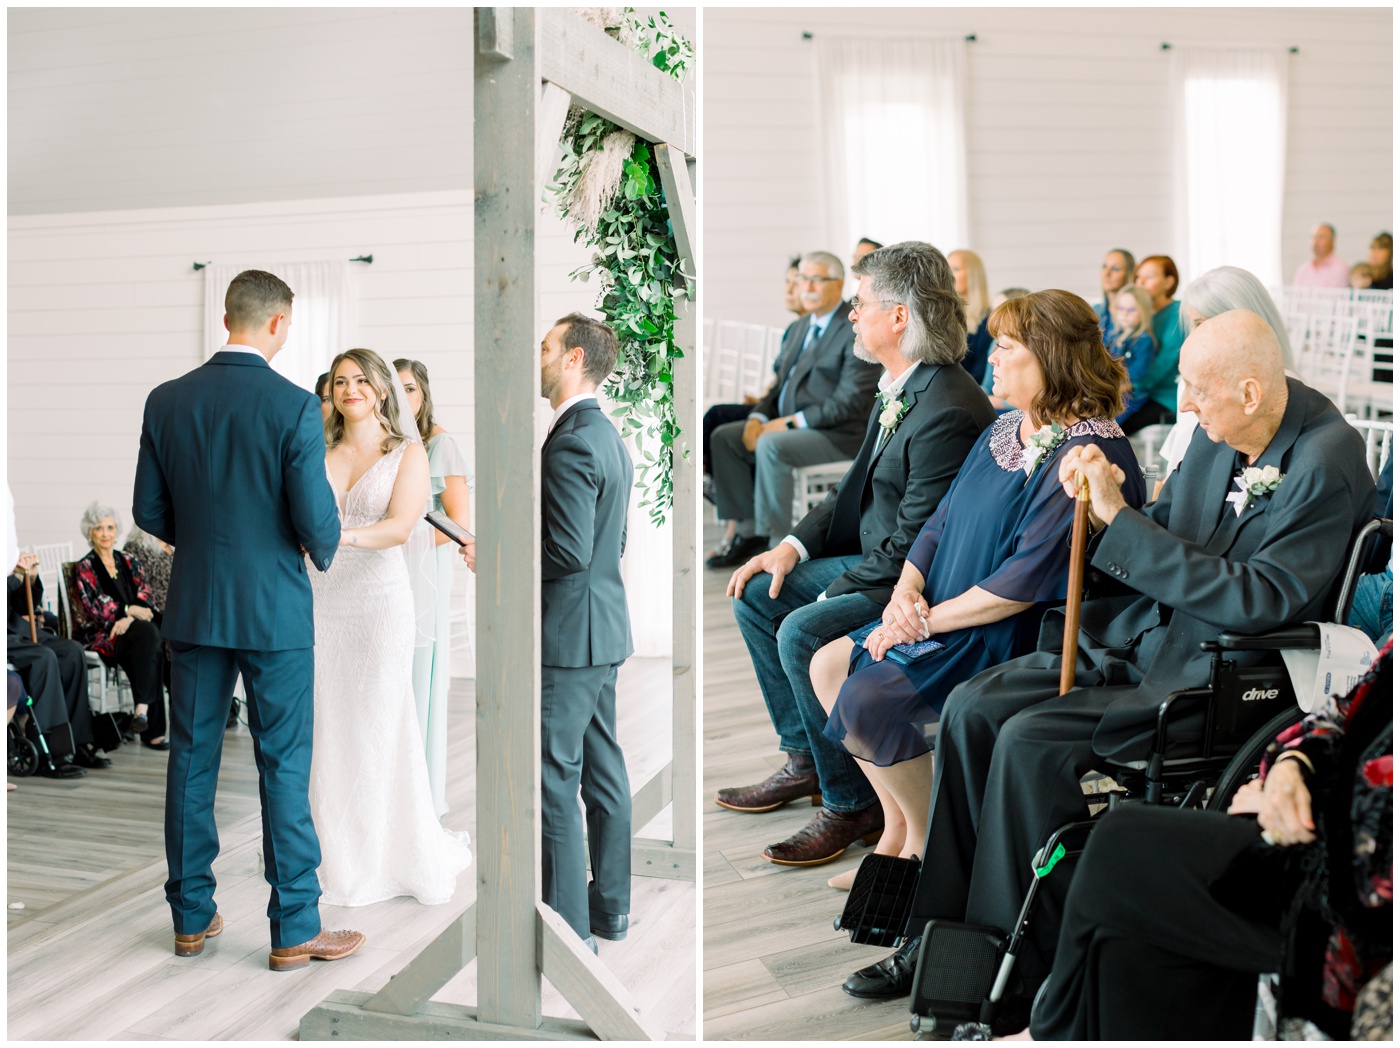 the guests watch as the bride and groom say I do during the ceremony 